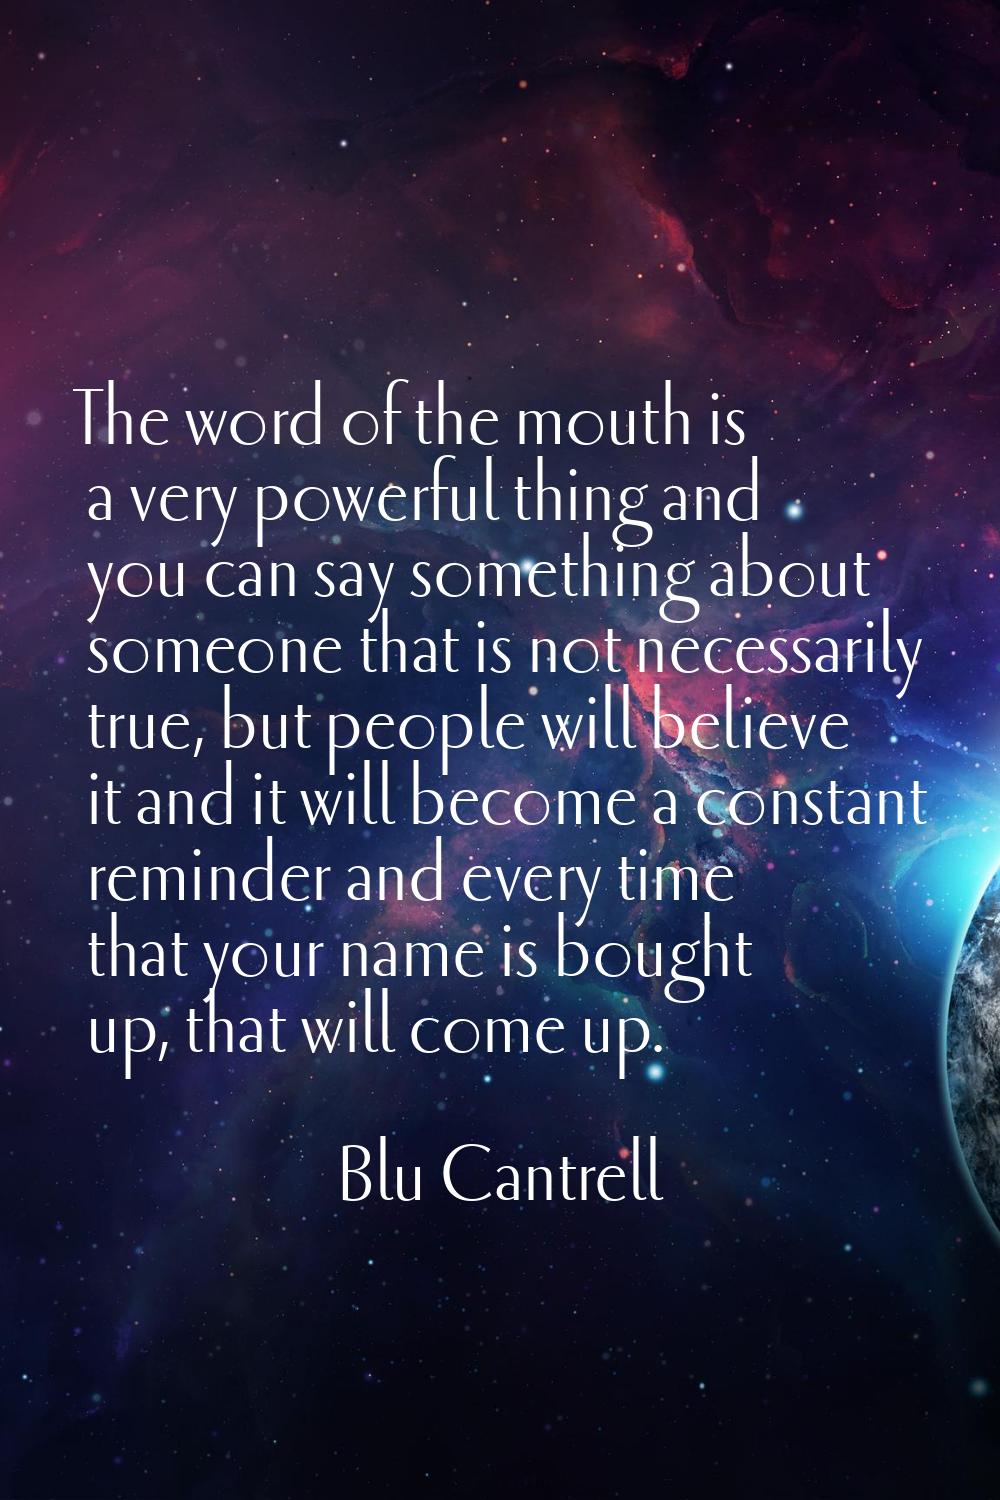 The word of the mouth is a very powerful thing and you can say something about someone that is not 